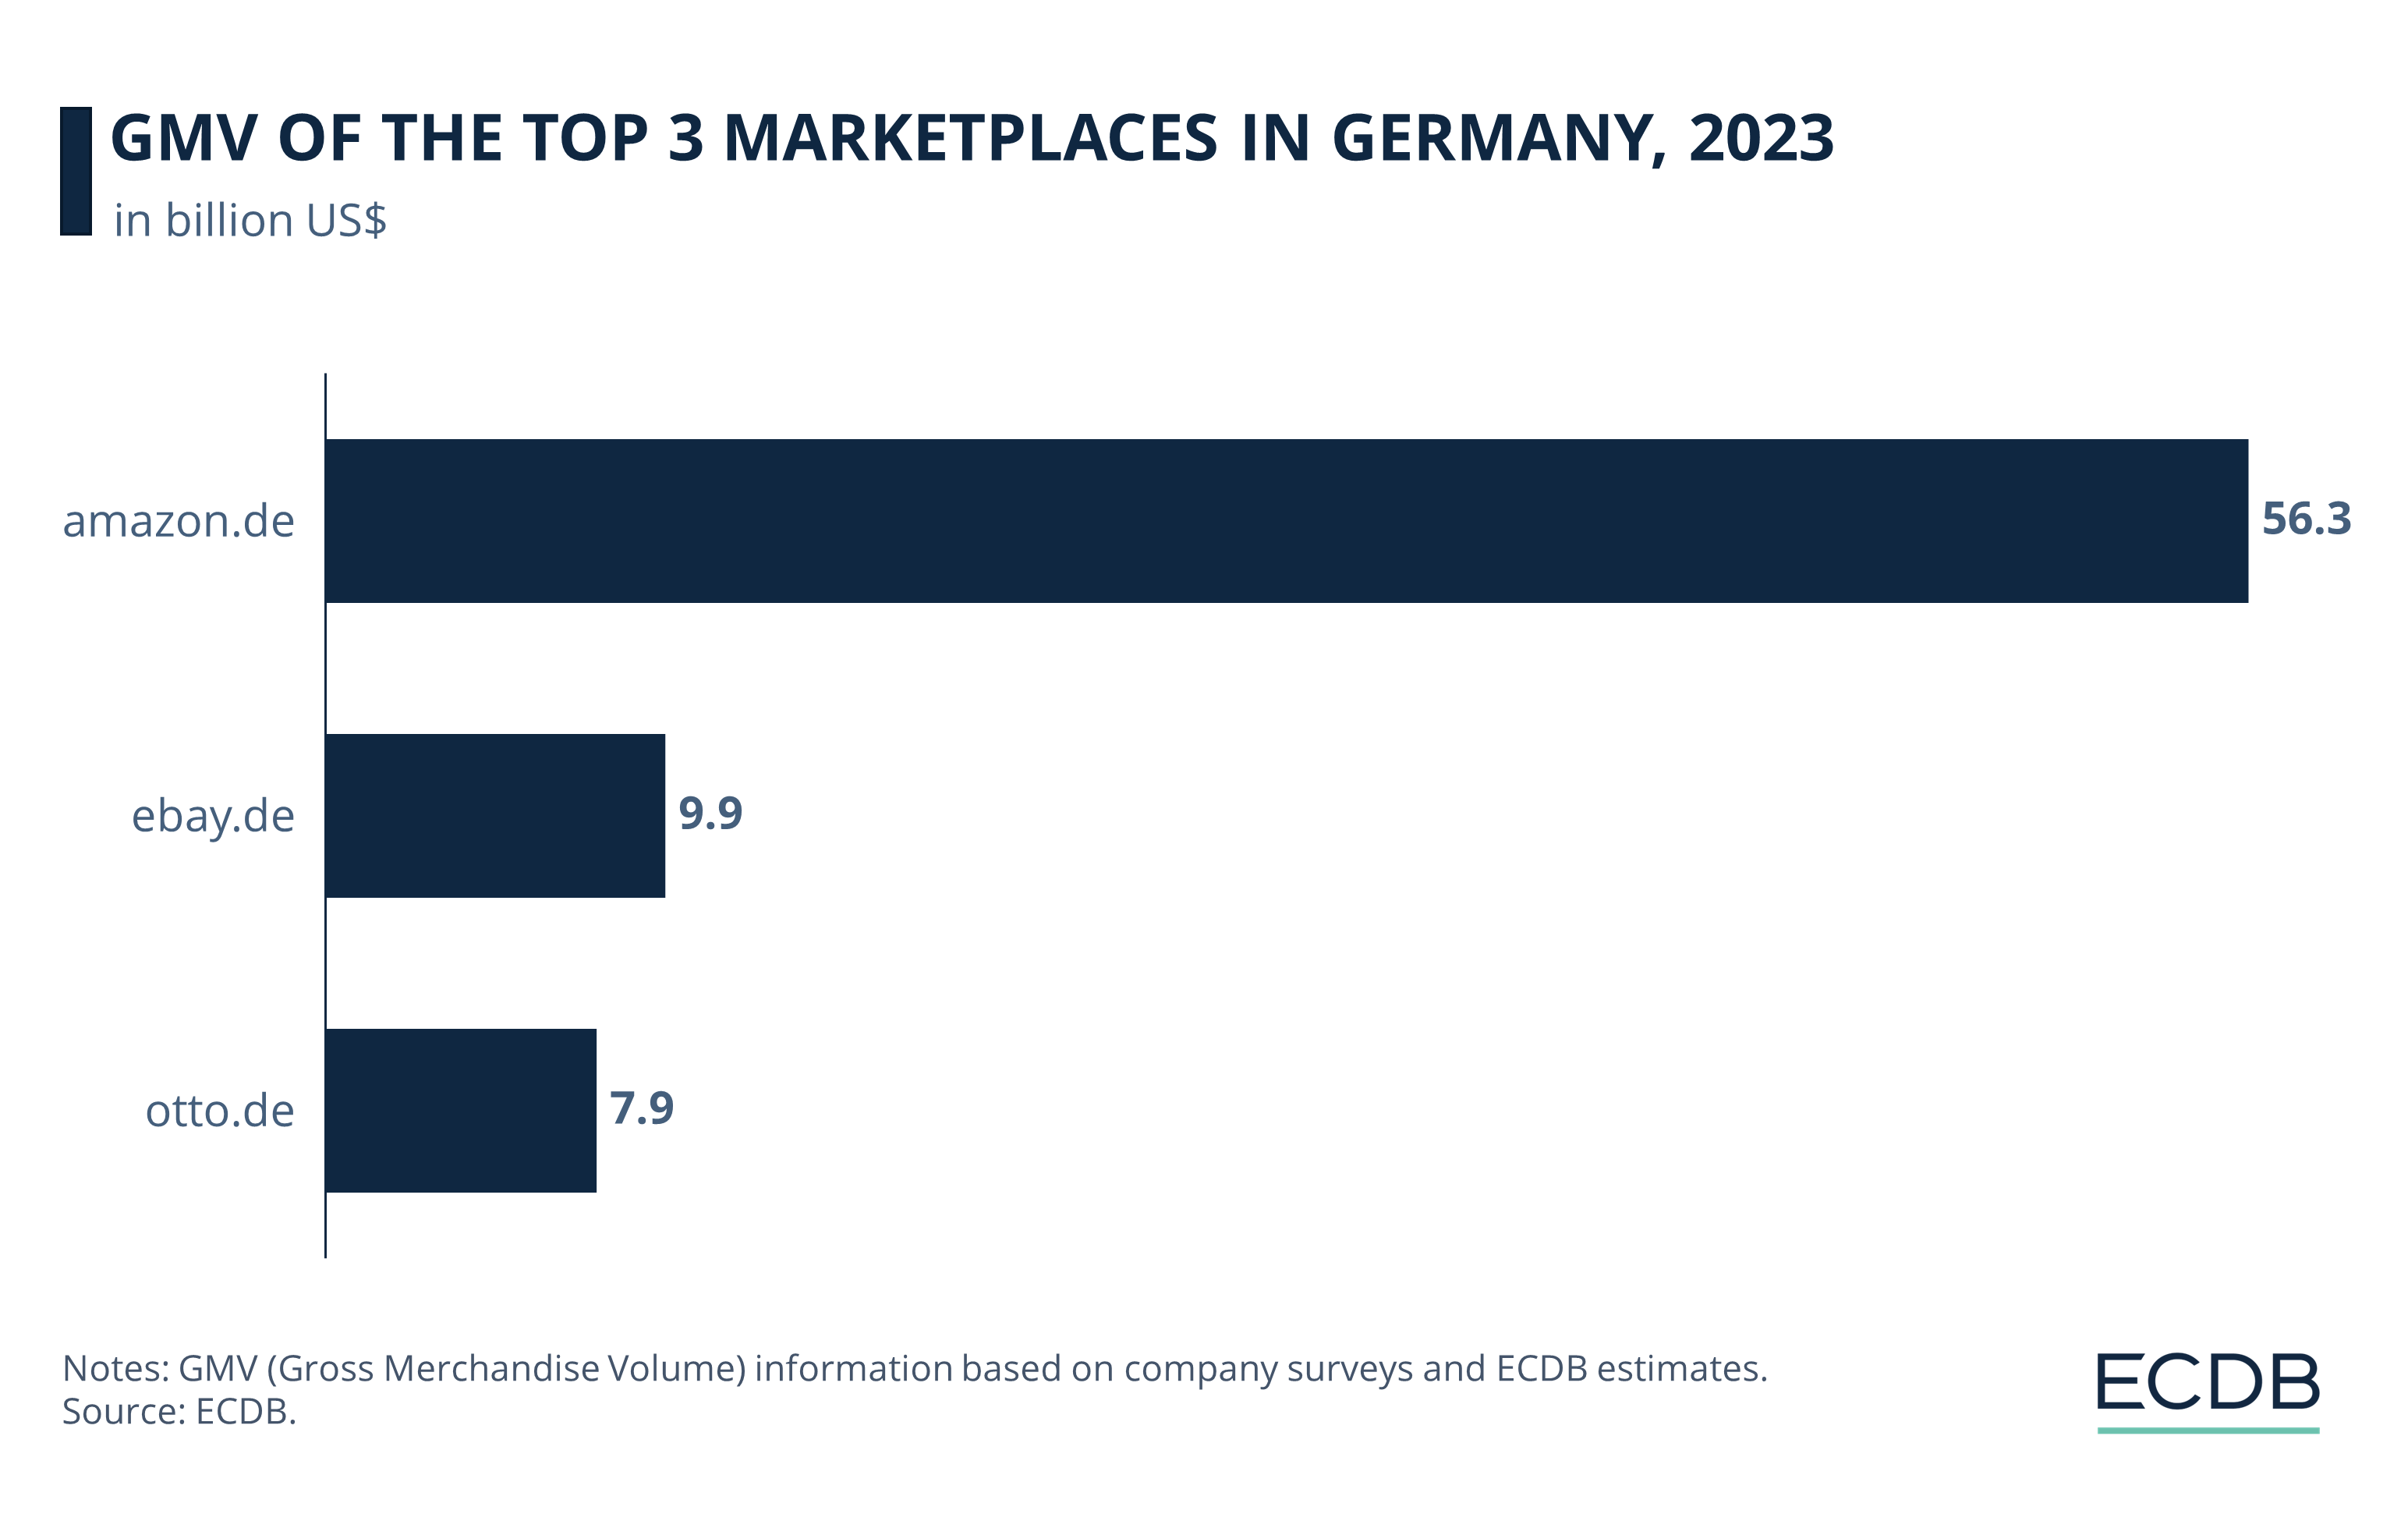 GMV of the Top Three Marketplaces in Germany in 2023